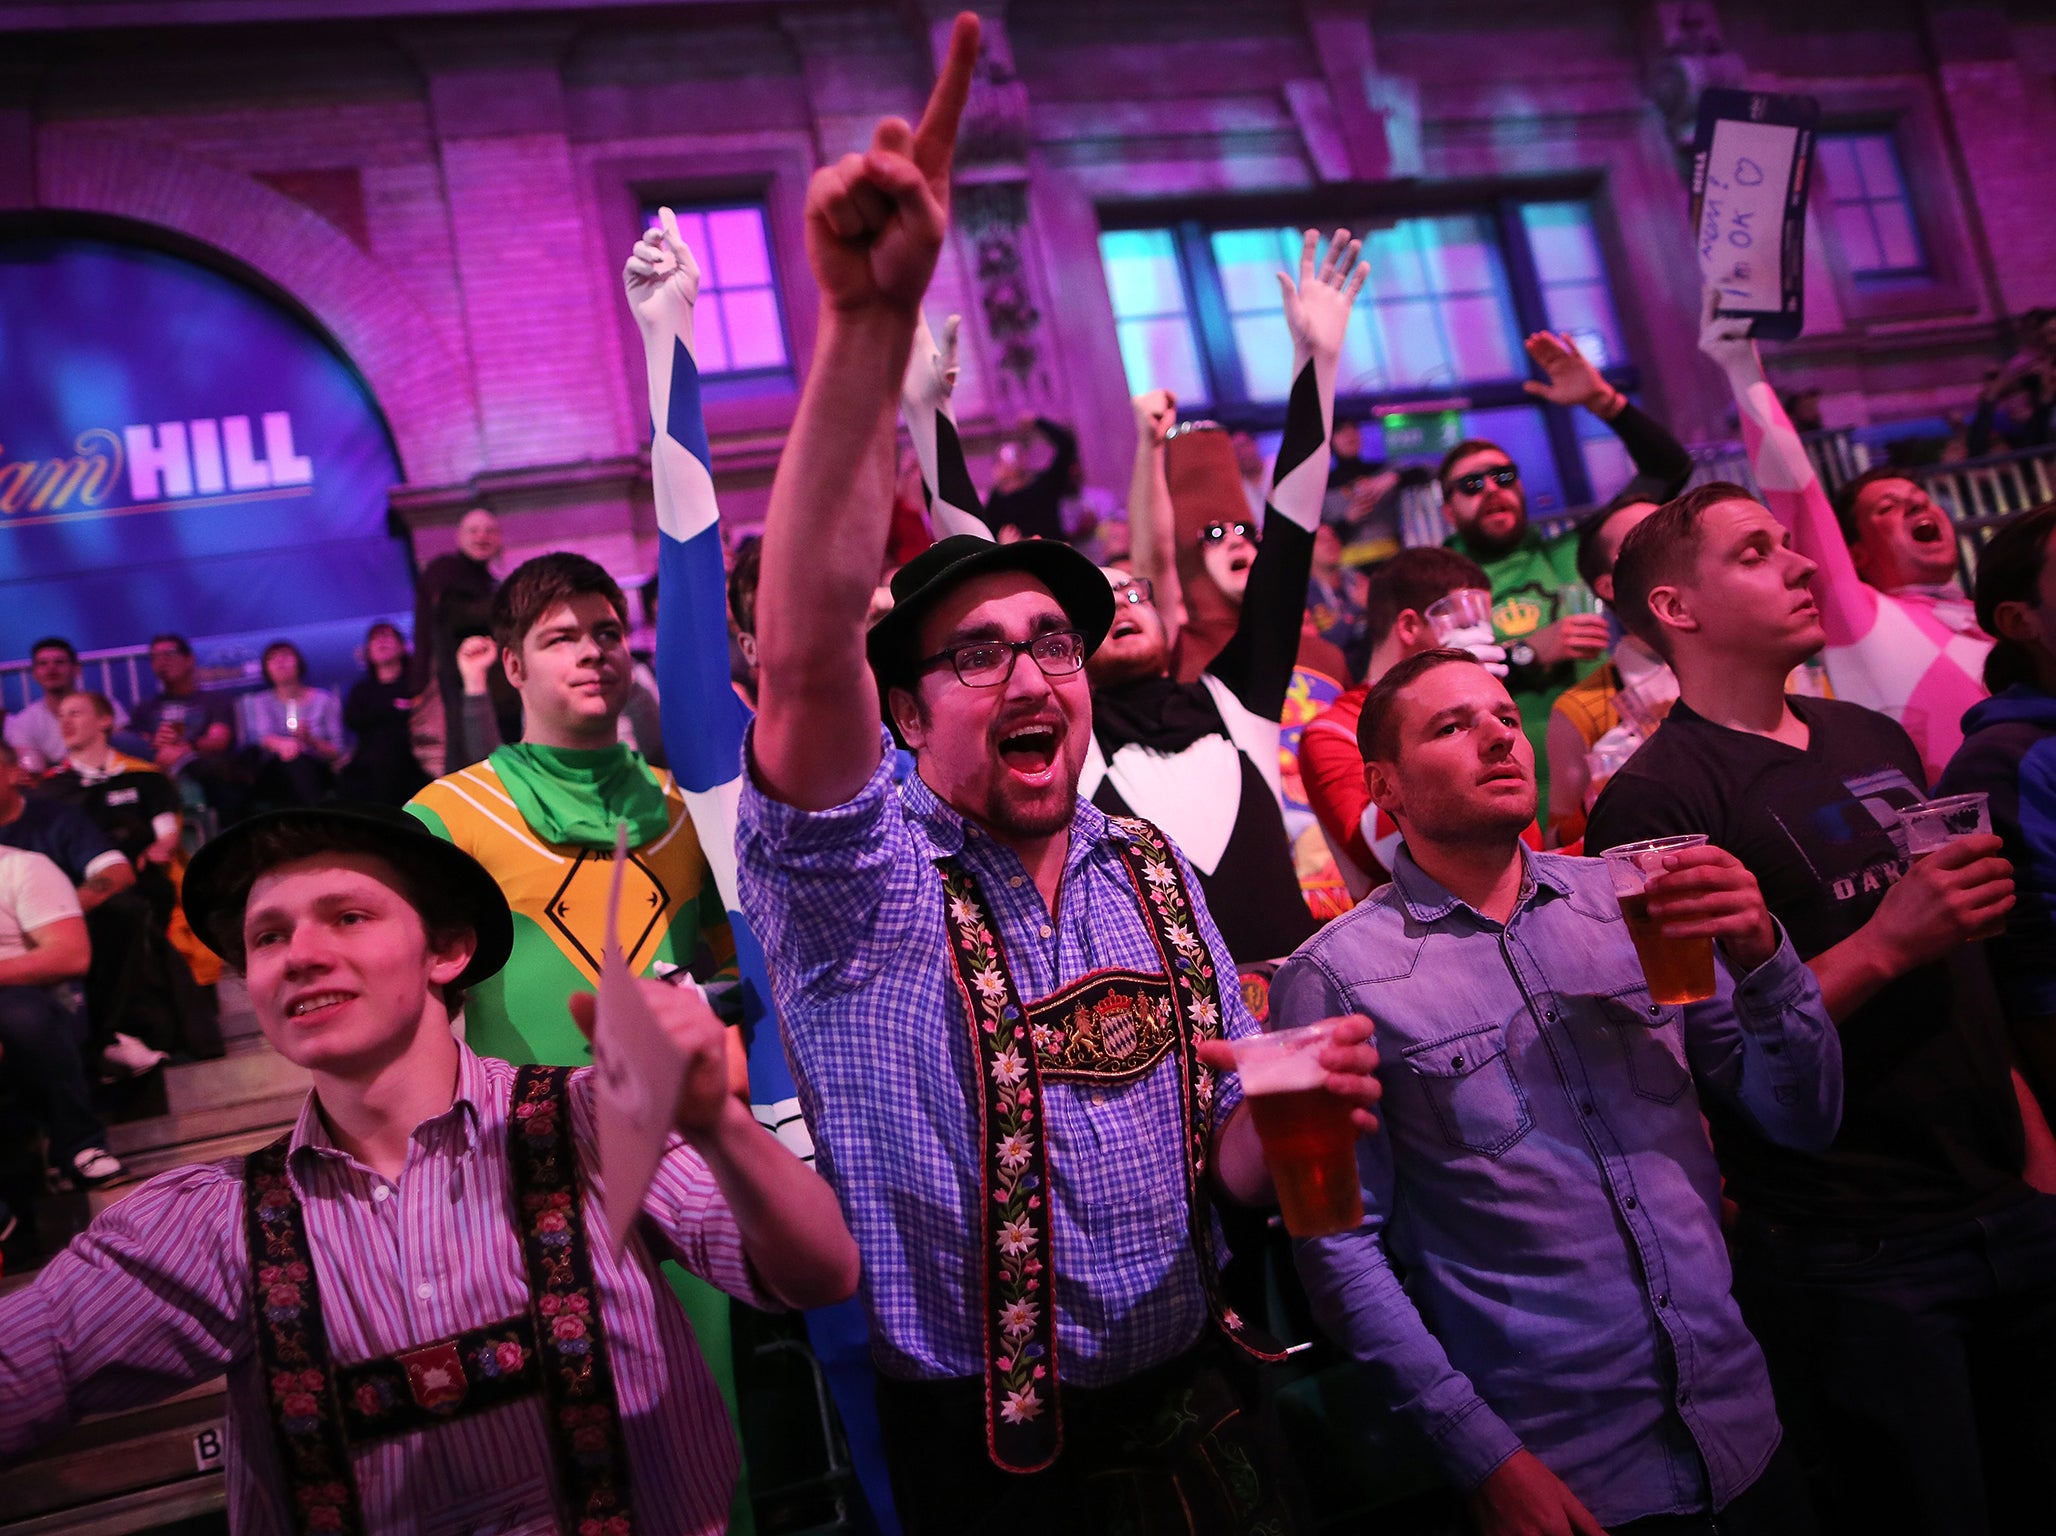 The World Darts Championship is the biggest event on the calendar